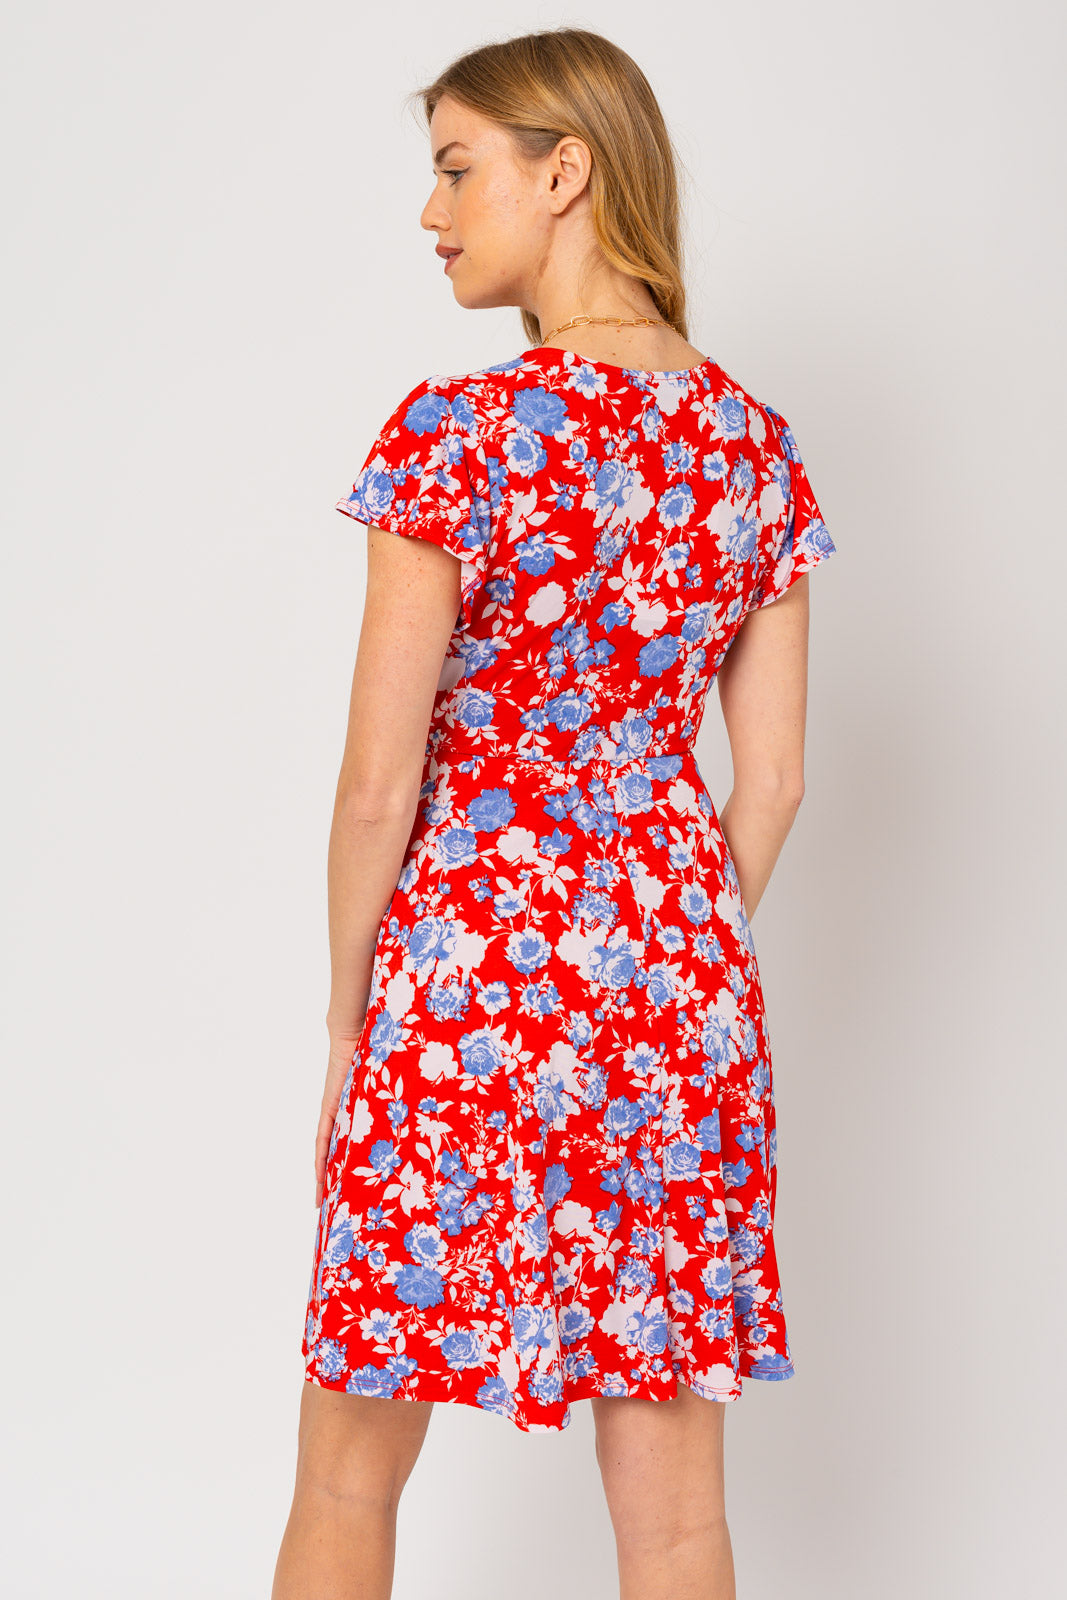 Wrap Top Red Floral Dress